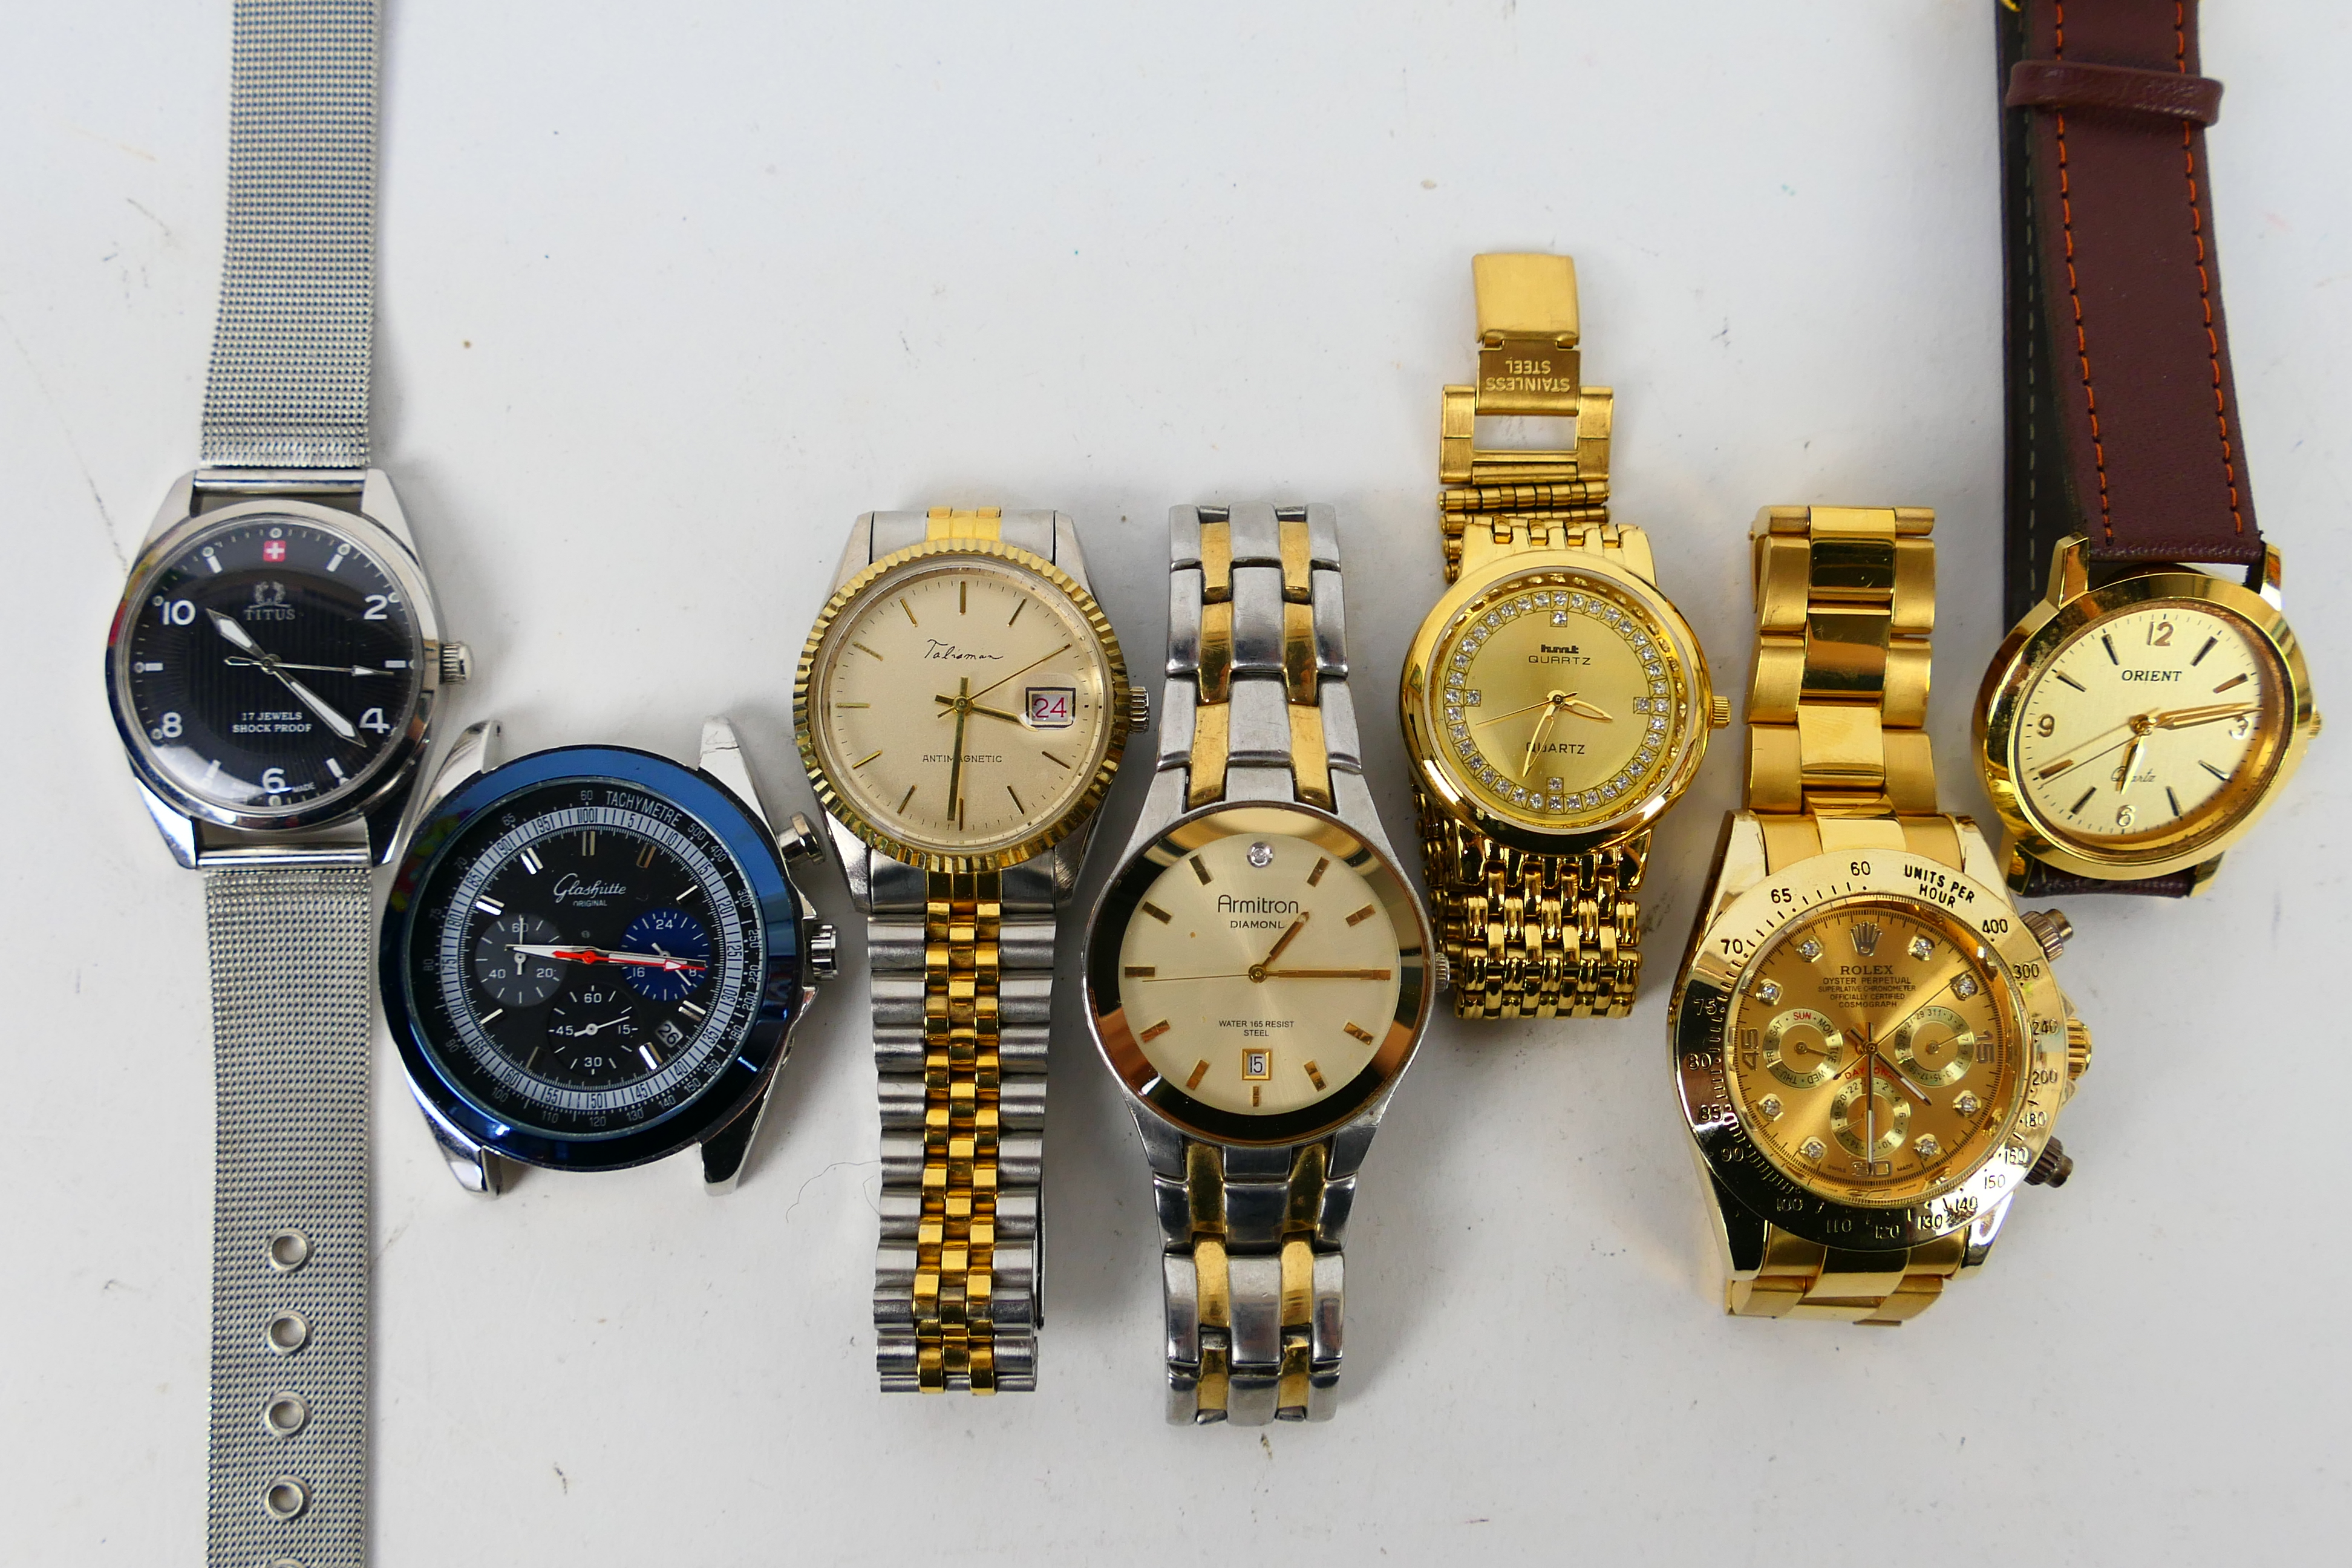 A quantity of wrist watches to include Titus, Orient, Armitron, HMT and other.